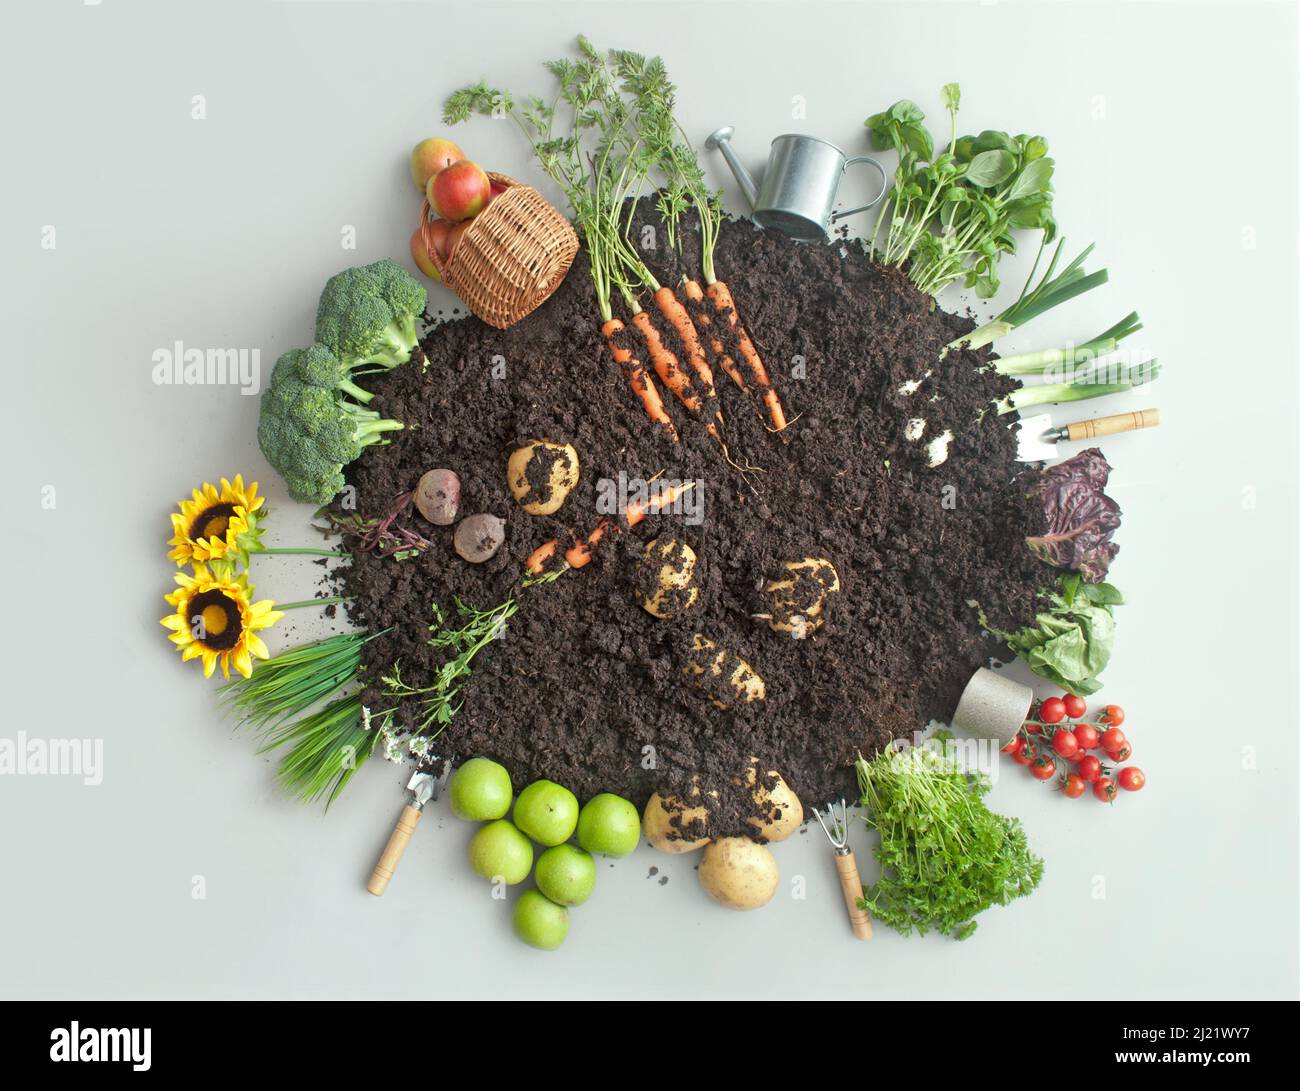 Fruits and vegetables growing in circular garden compost including carrots, potatoes and lettuce Stock Photo